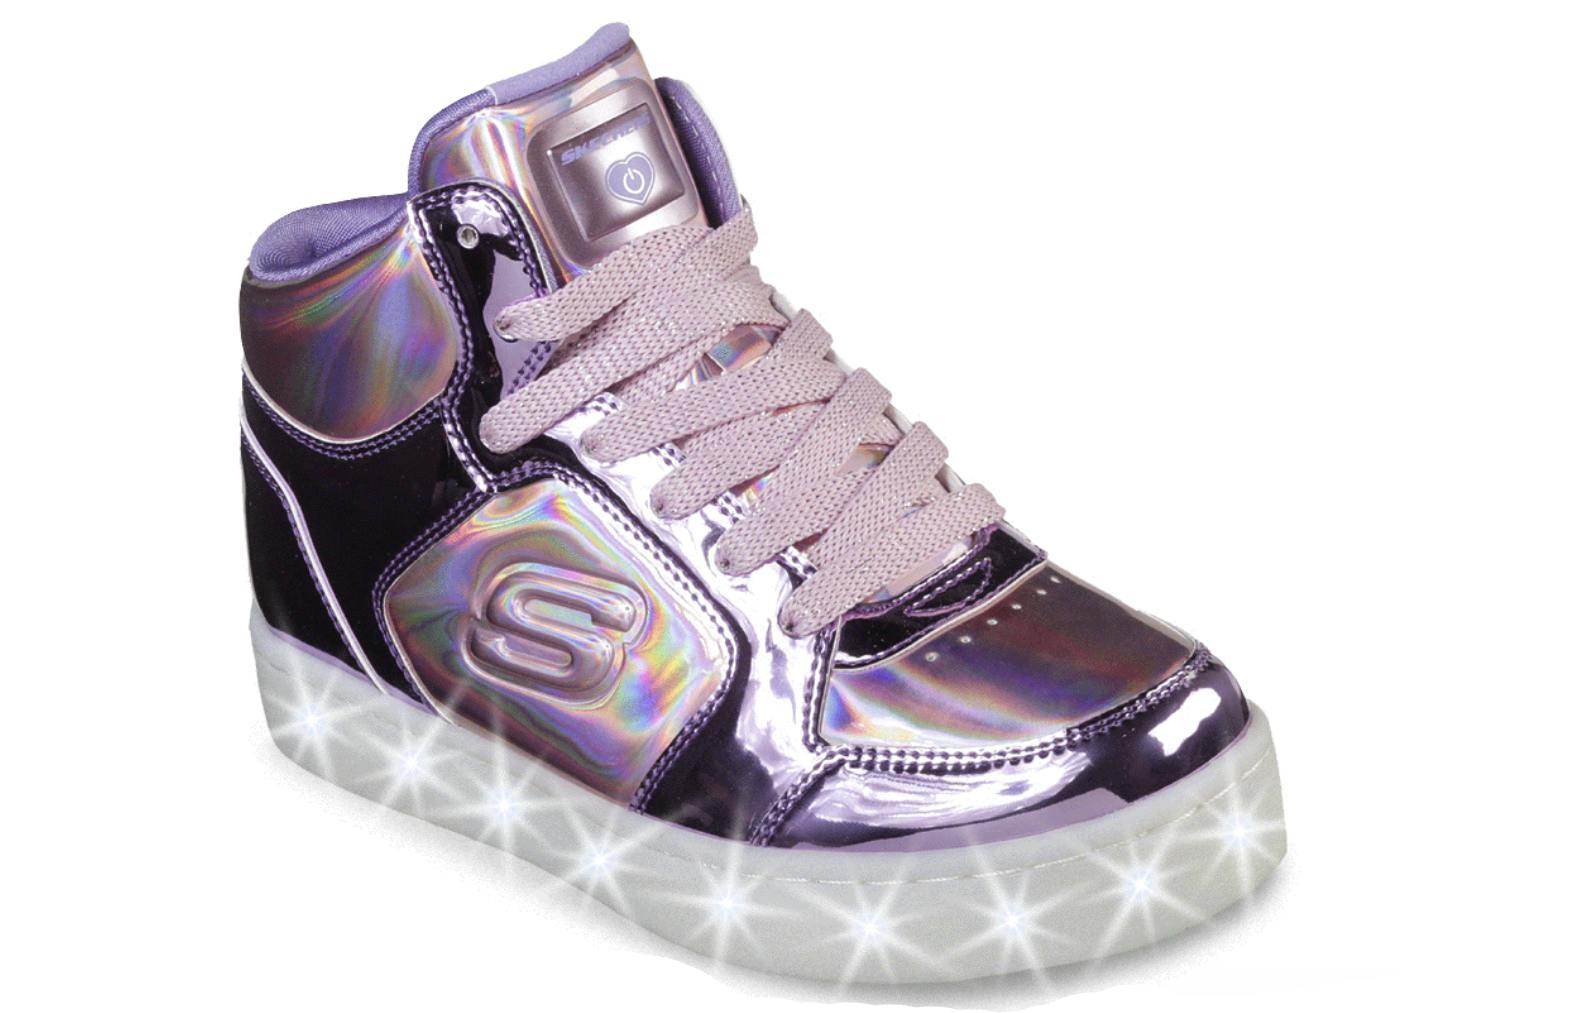 Skechers Light-Up Sneakers at DSW 